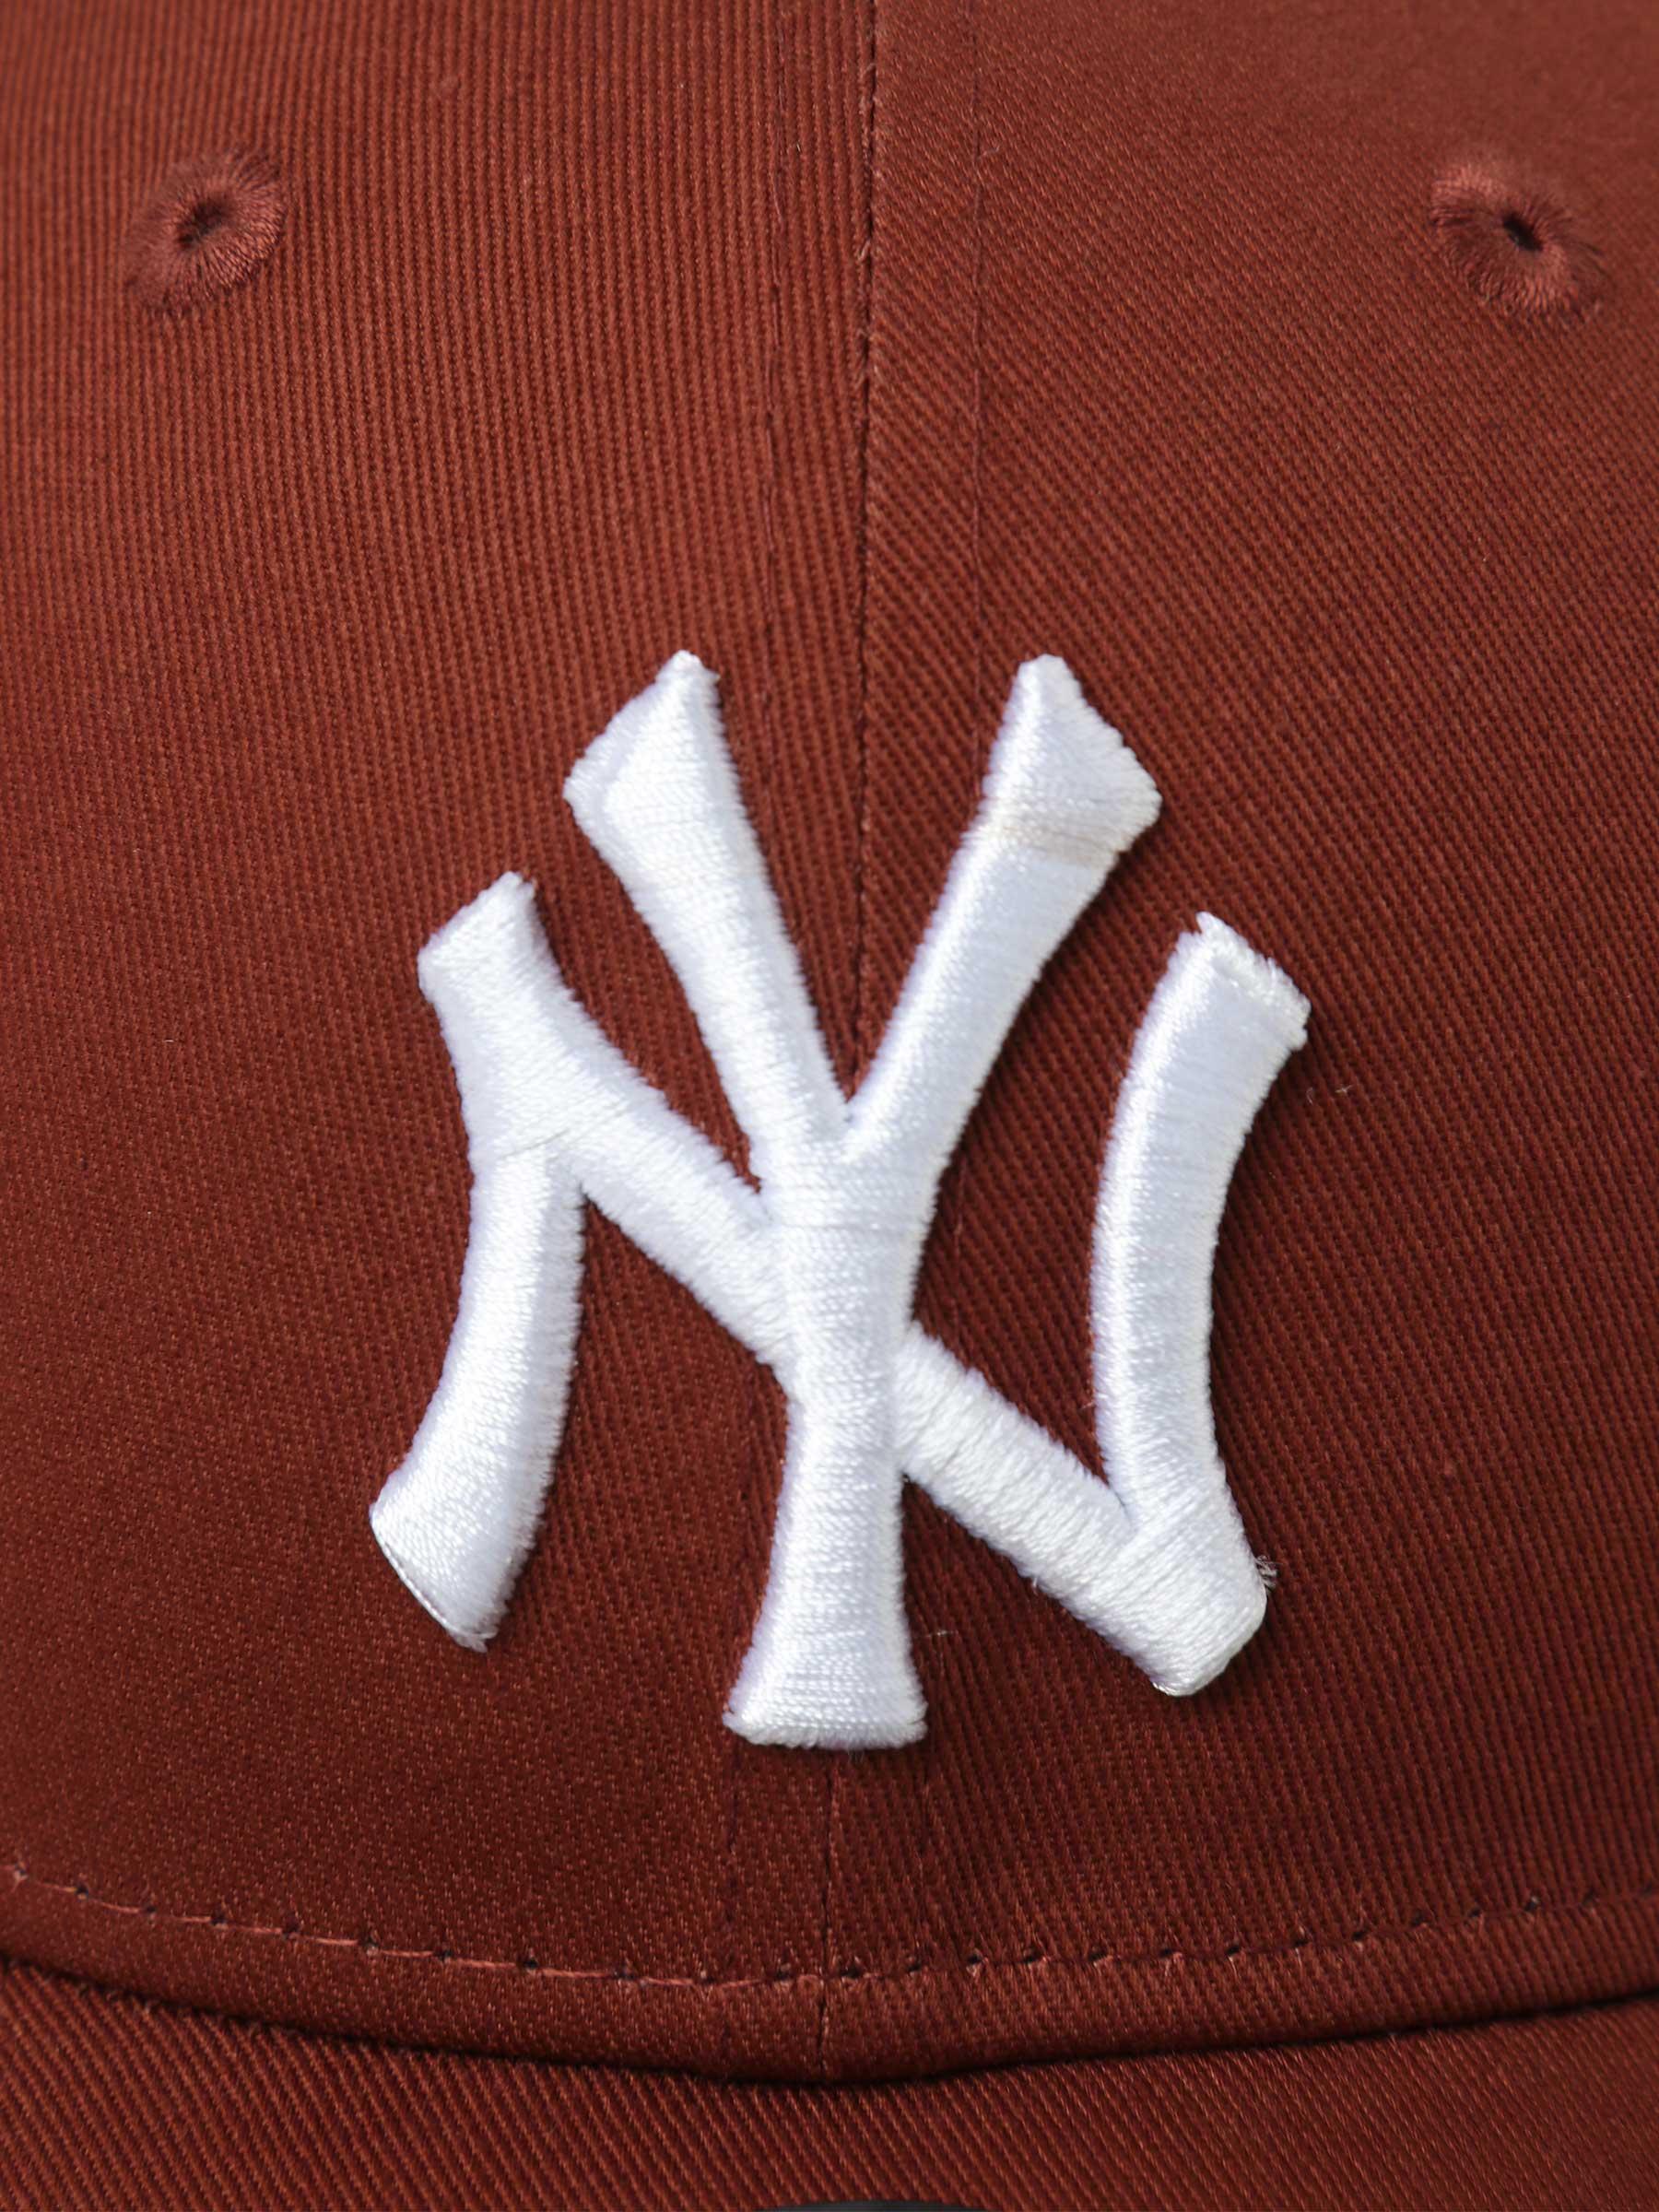 9Forty League Essential New York Yankees Red NE60141847